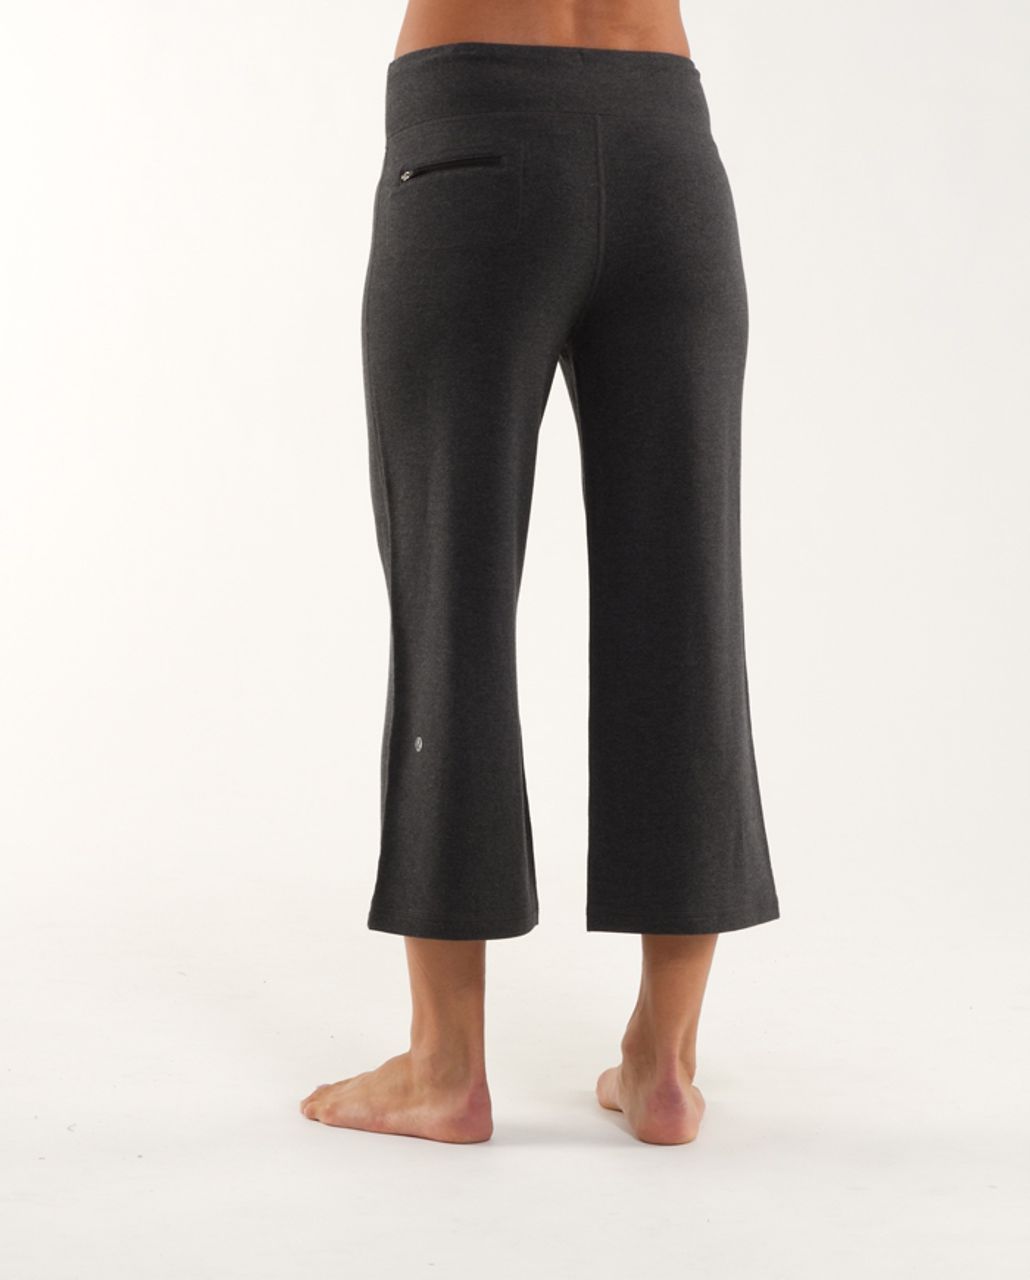 Lululemon Relaxed Fit Crop *Modal - Heathered Black